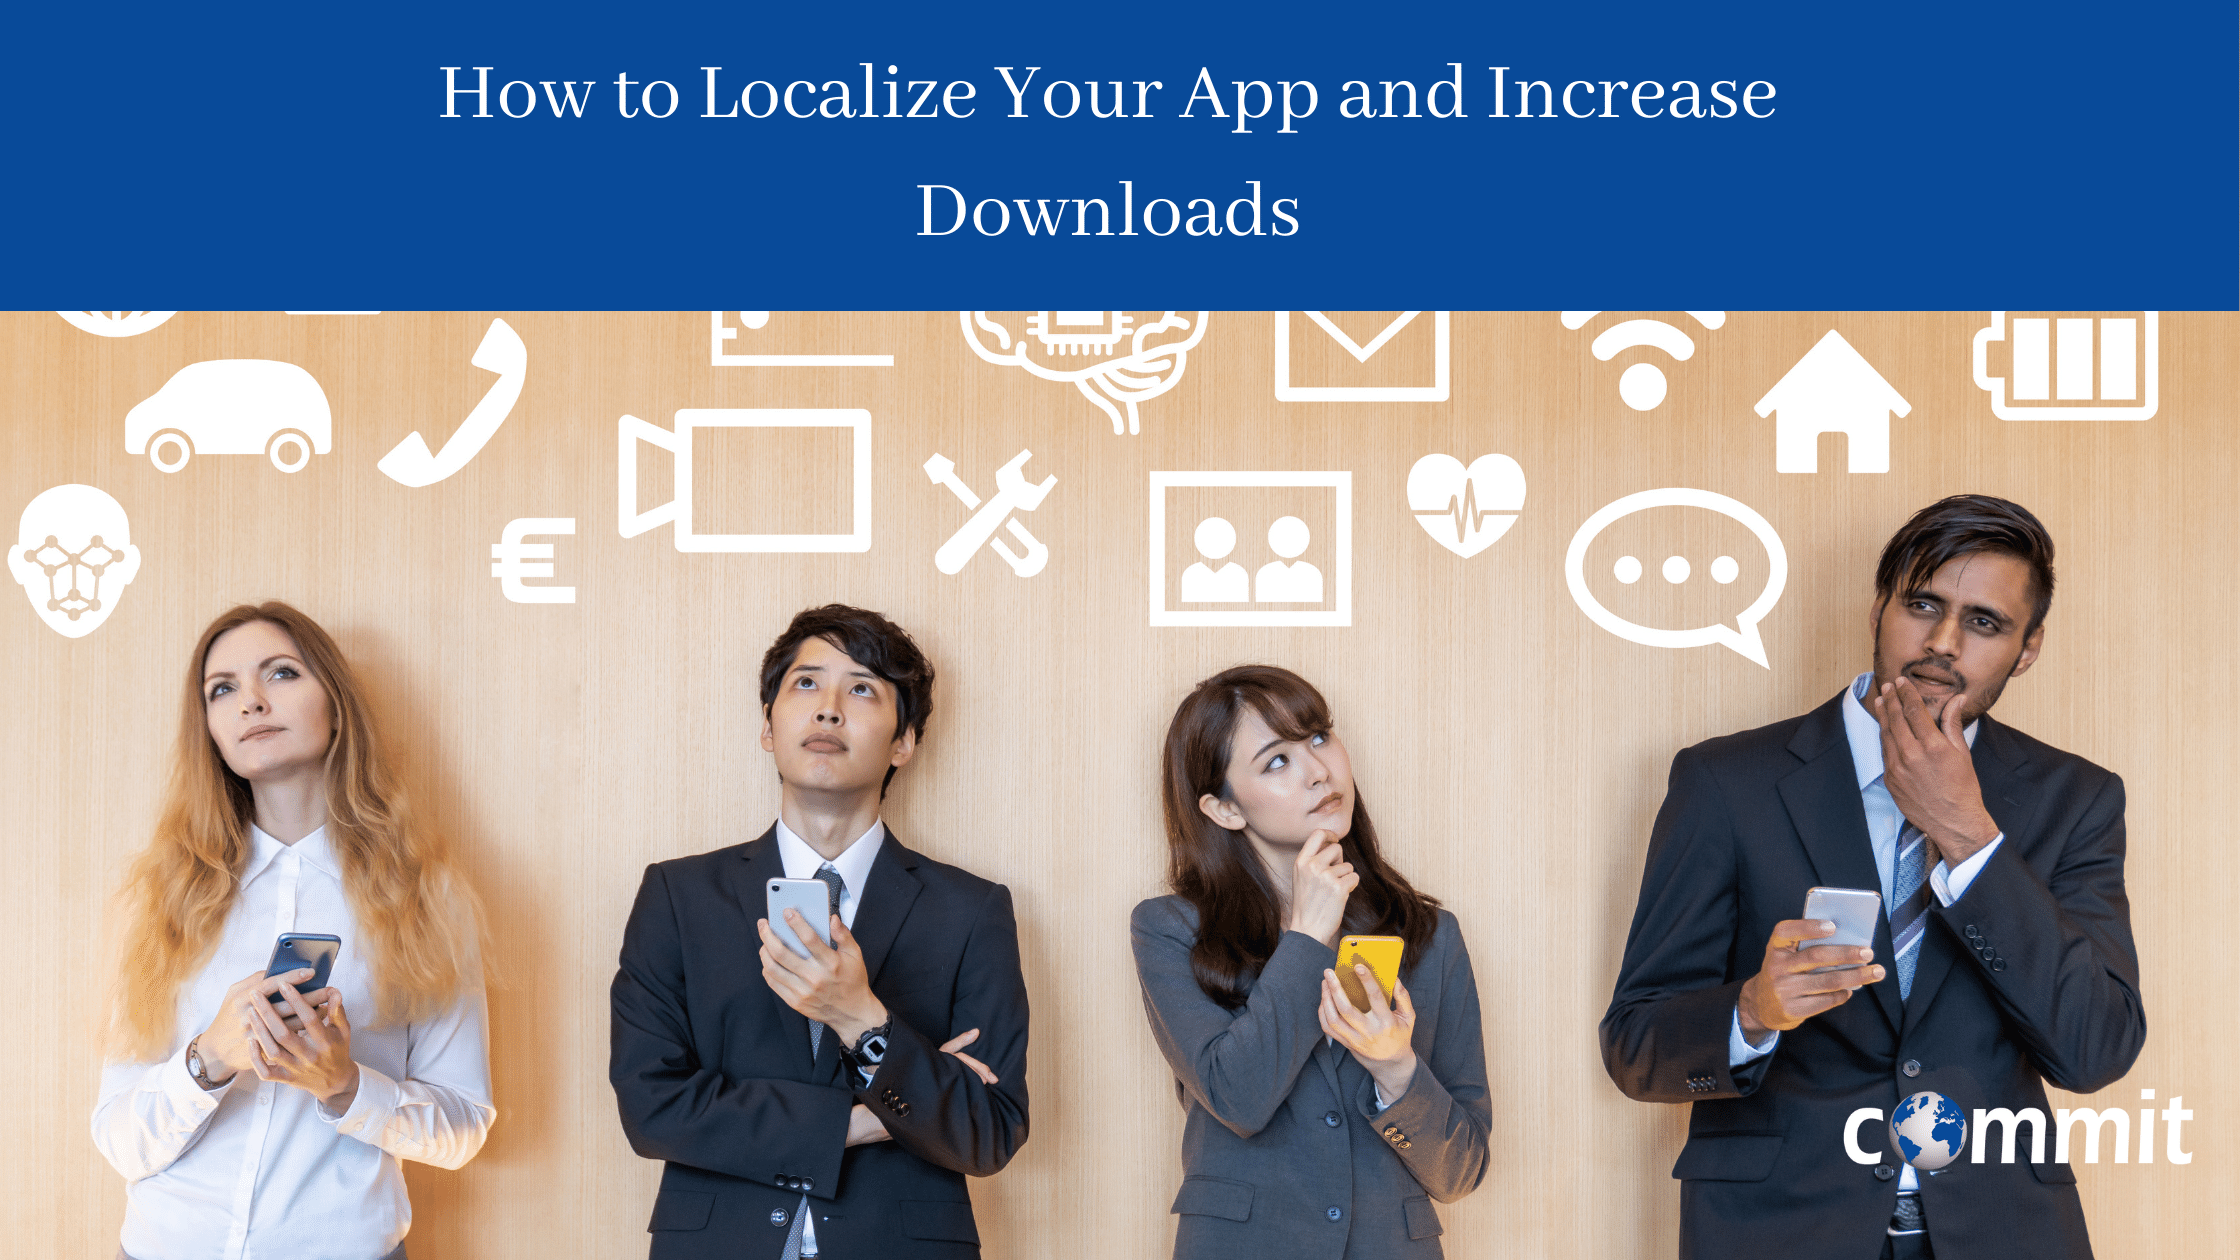 How to Localize Your App and Increase Downloads